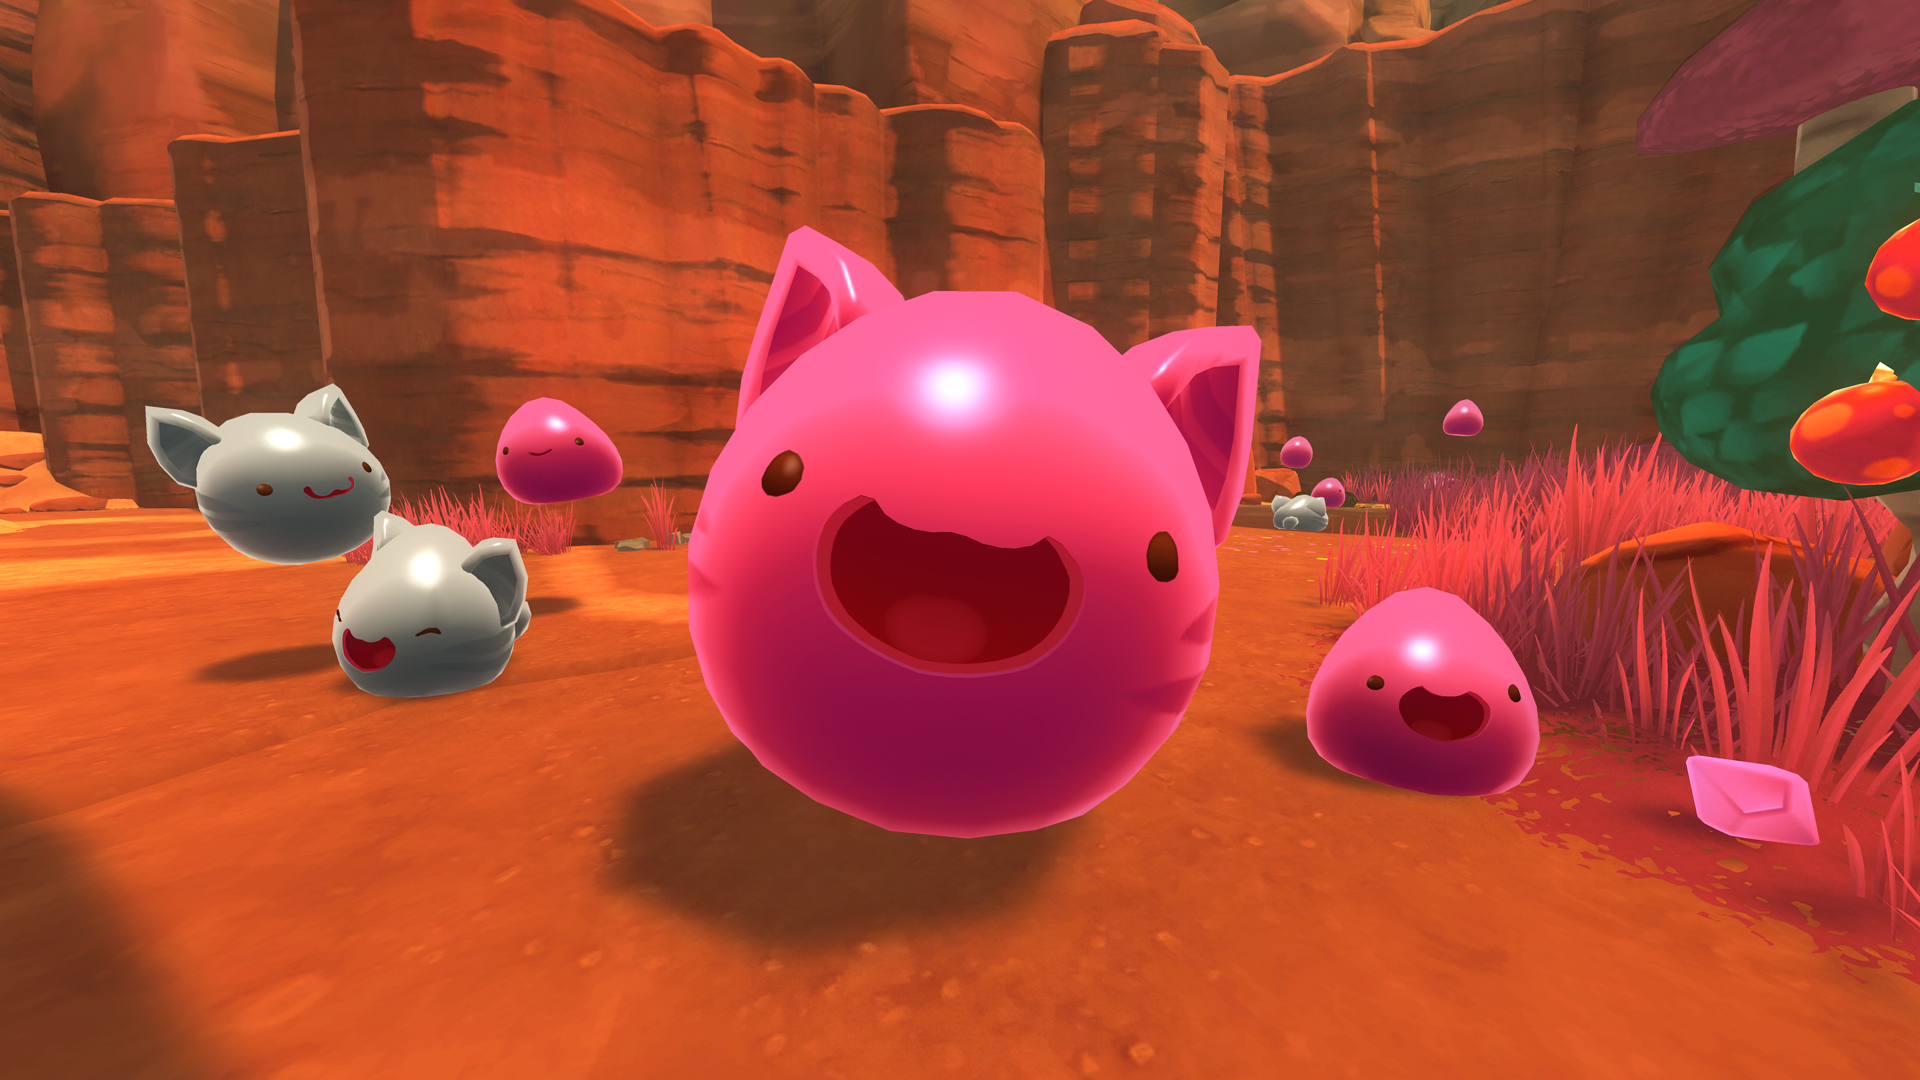 How To Download Slime Rancher 2019 Easy For Mac